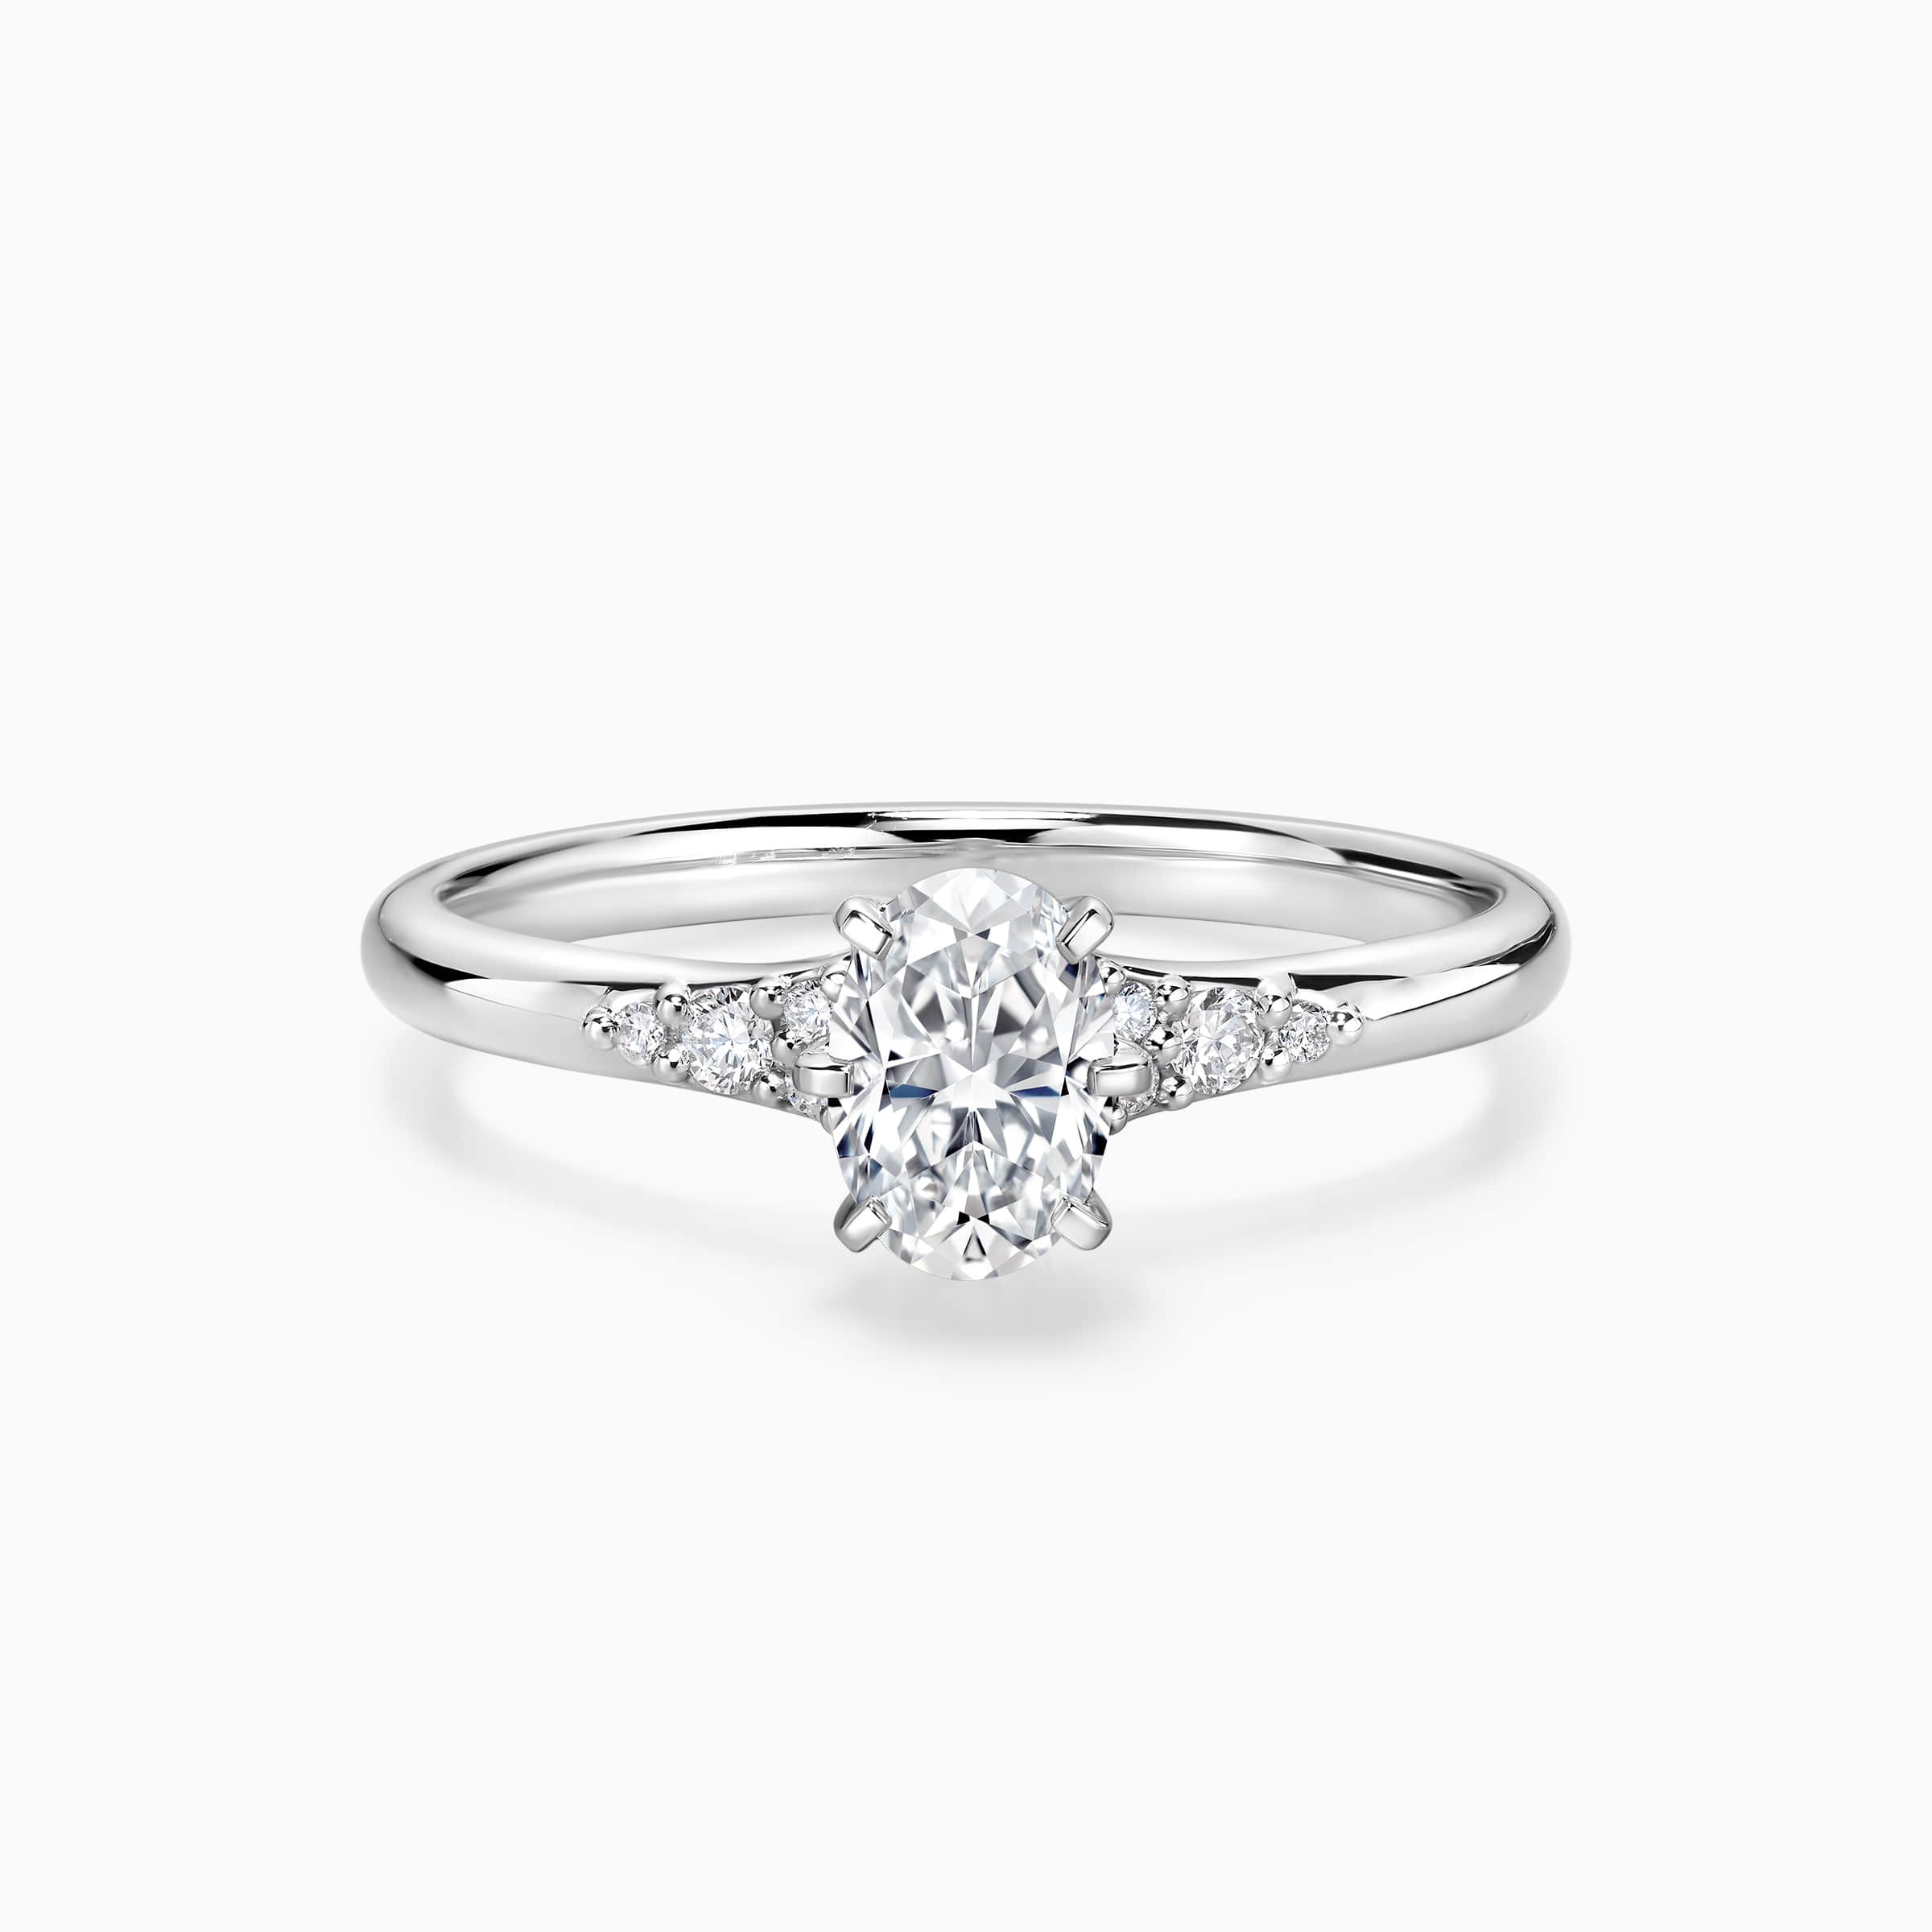 Darry Ring oval engagement ring in white gold